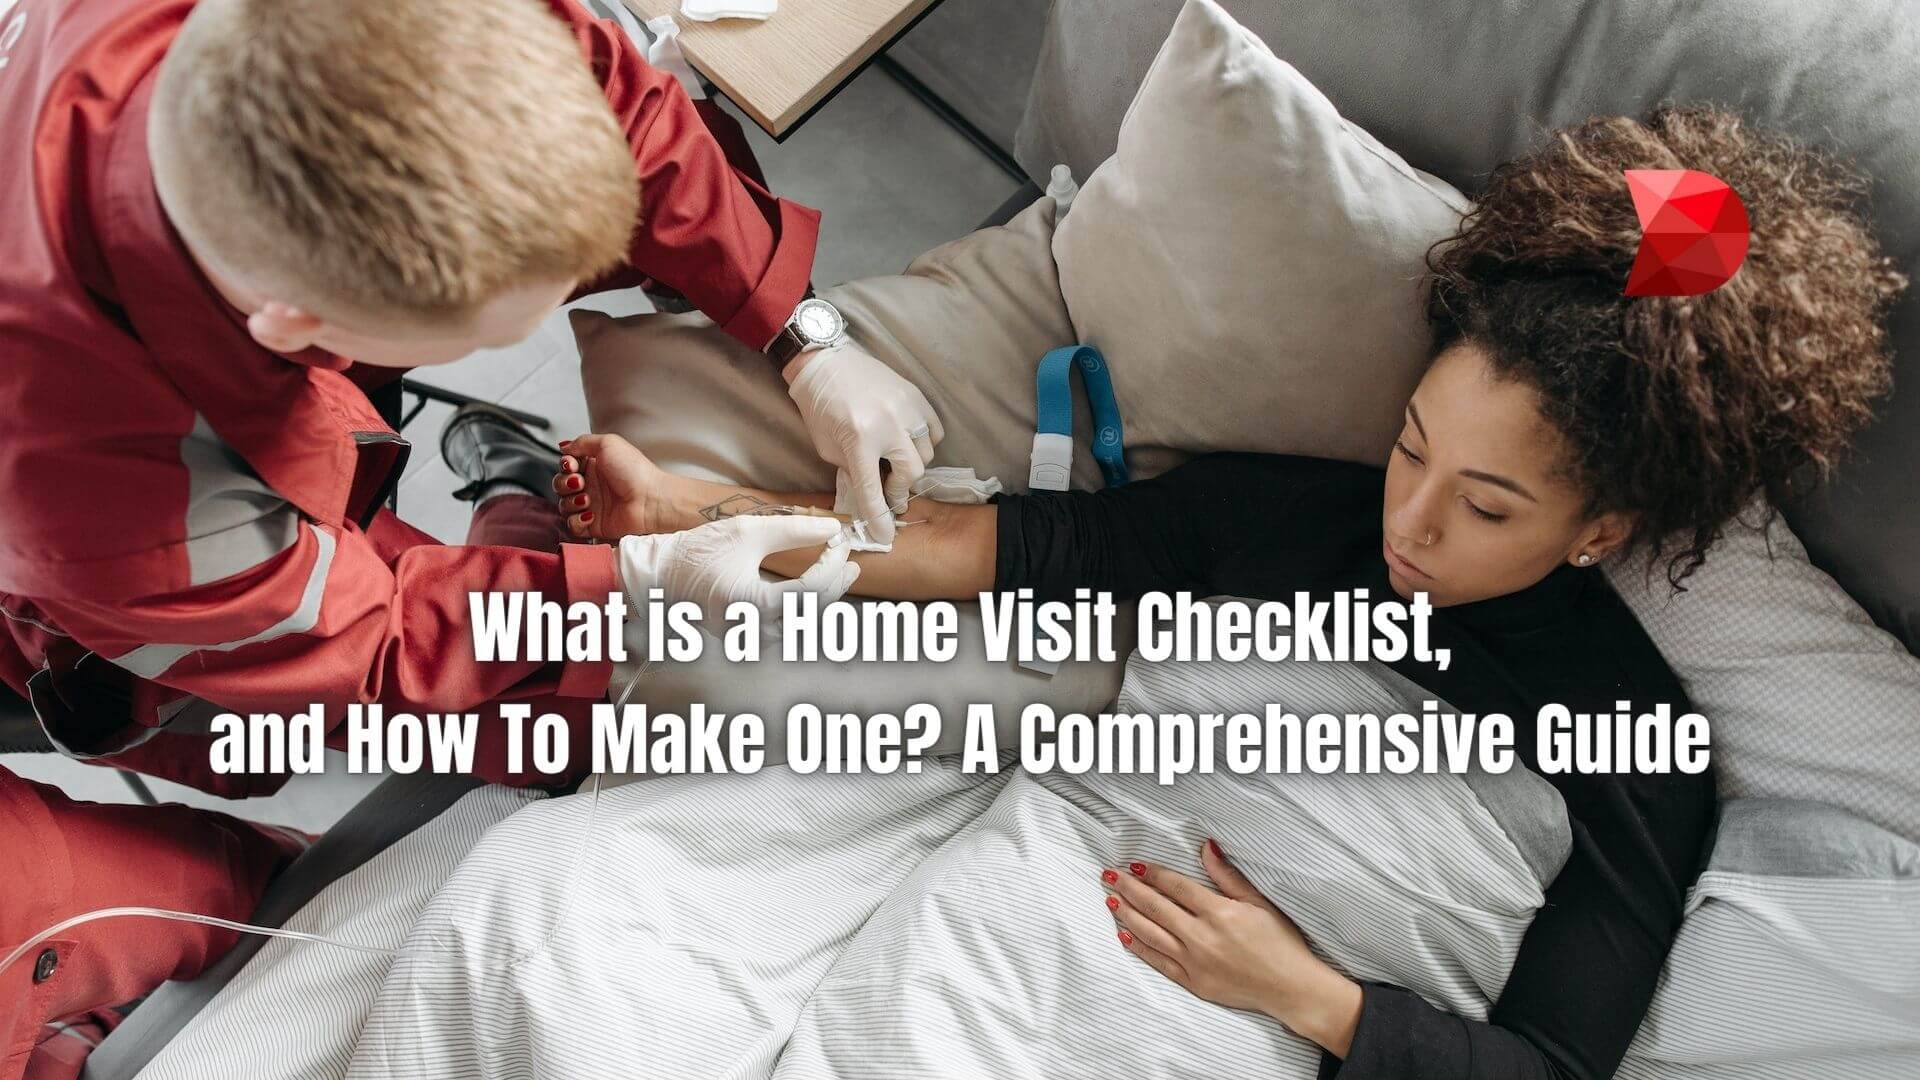 A home visit checklist is a list of items and tasks that healthcare professionals use during a medical home visit. Here's how to create one!